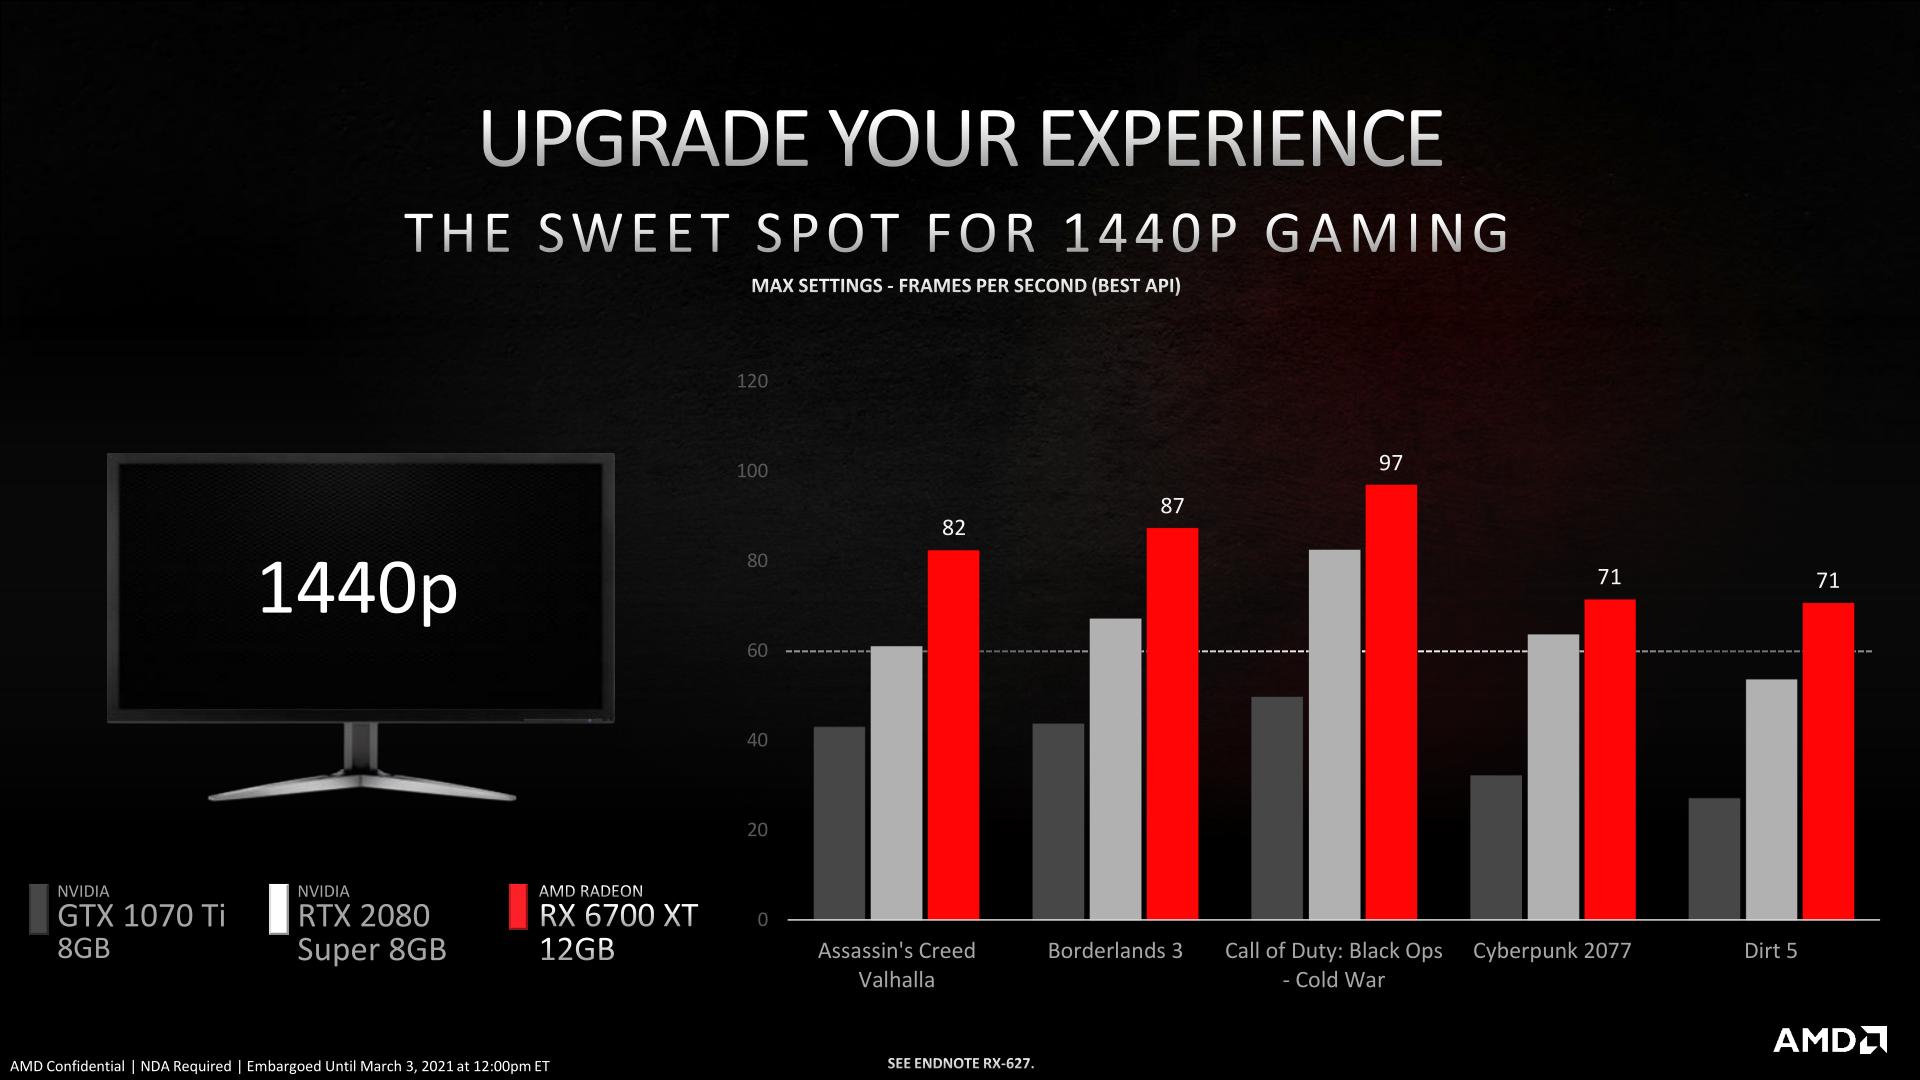 Exclusive: Next Generation AMD Mobility 7nm CPUs Landing In Q1 2020, Will  Bring AMD Gaming Laptops Price Down To $699